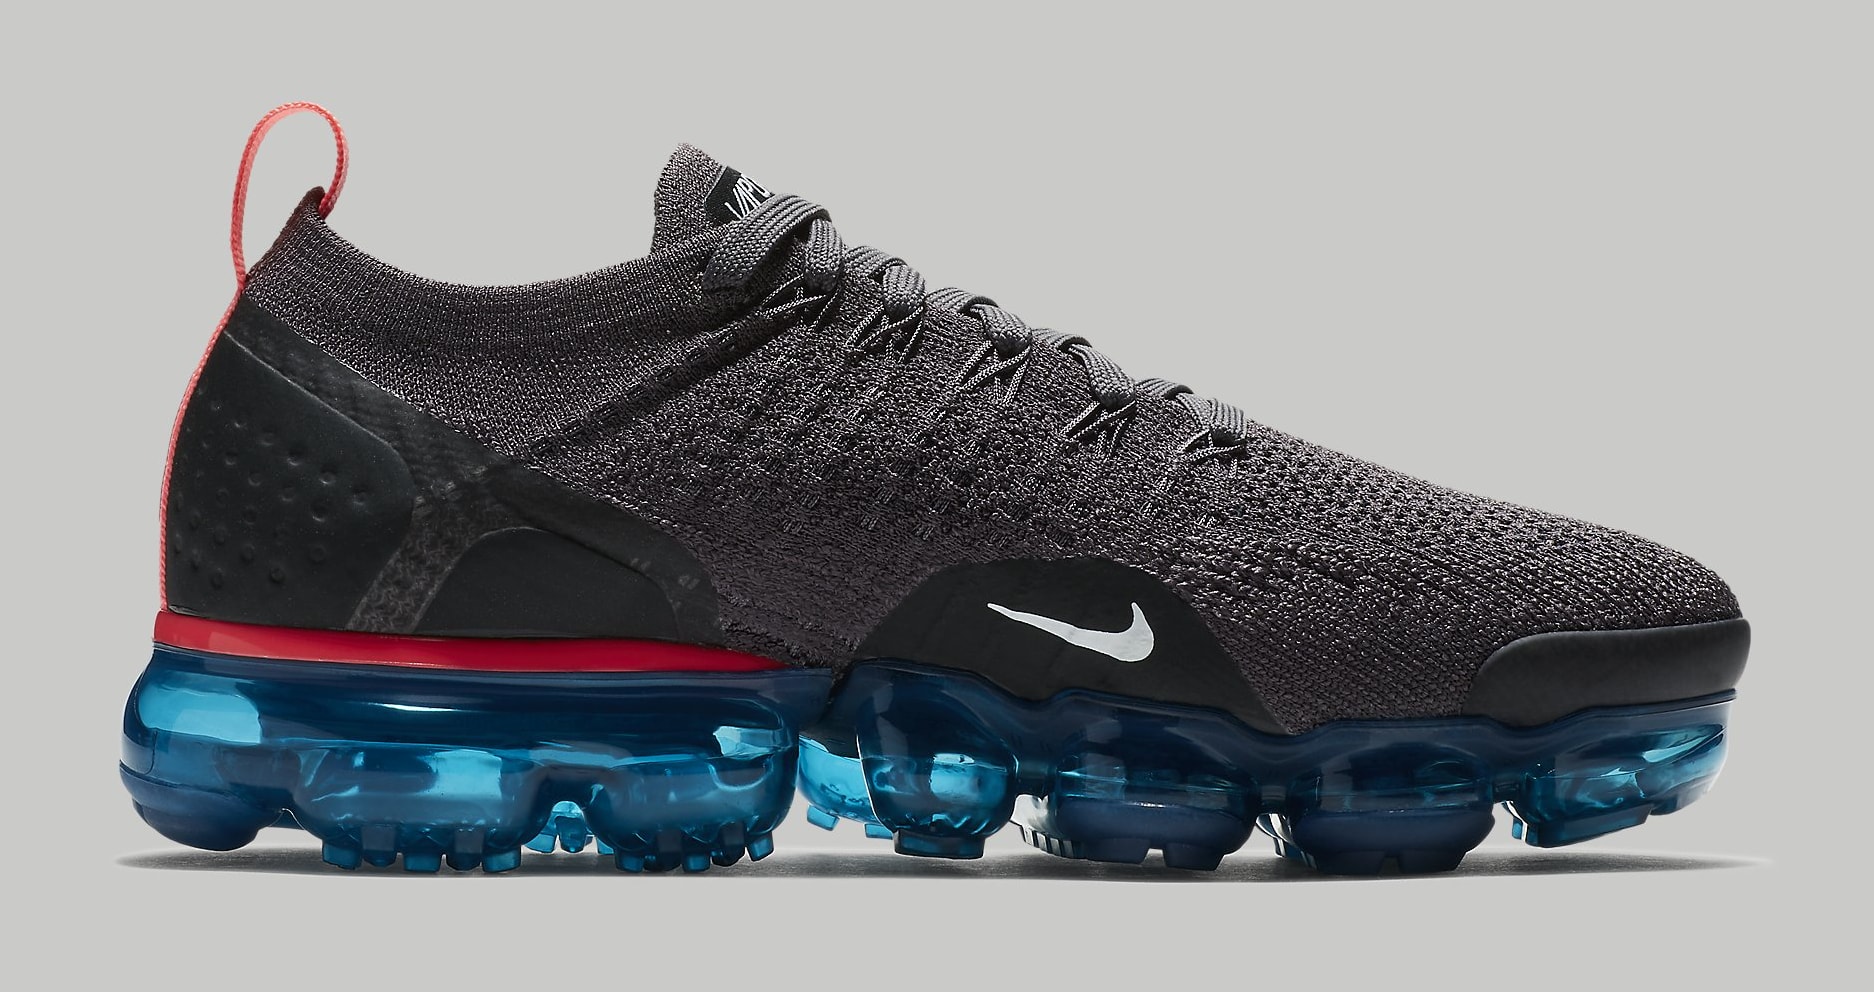 nike-air-vapormax-2-flyknit-thunder-grey-942843-009-release-date-side